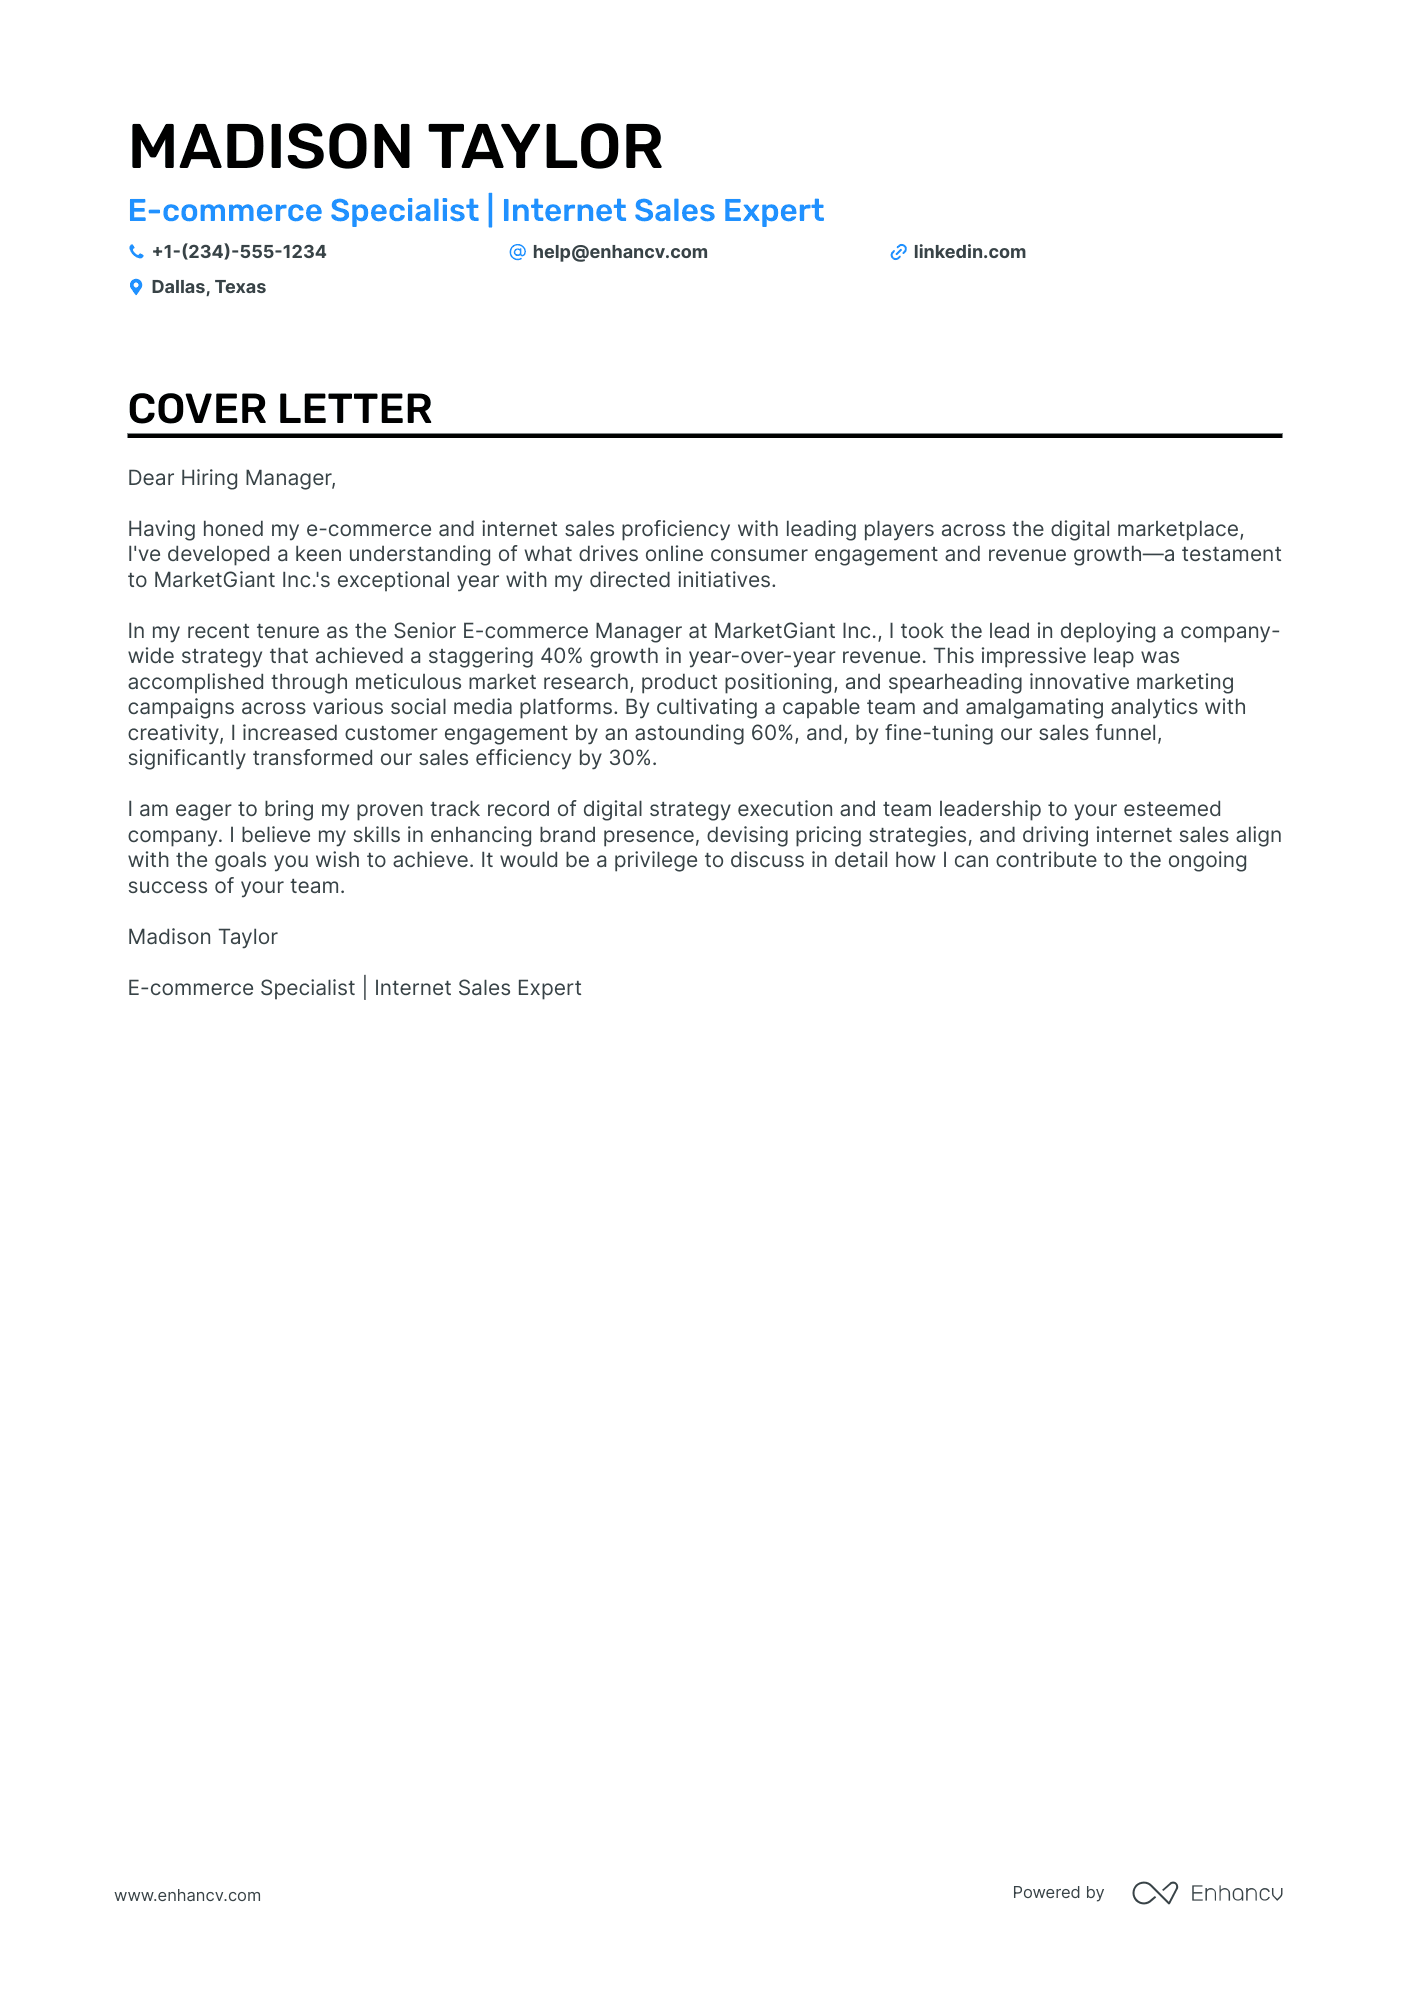 cover letter sample for sales manager role